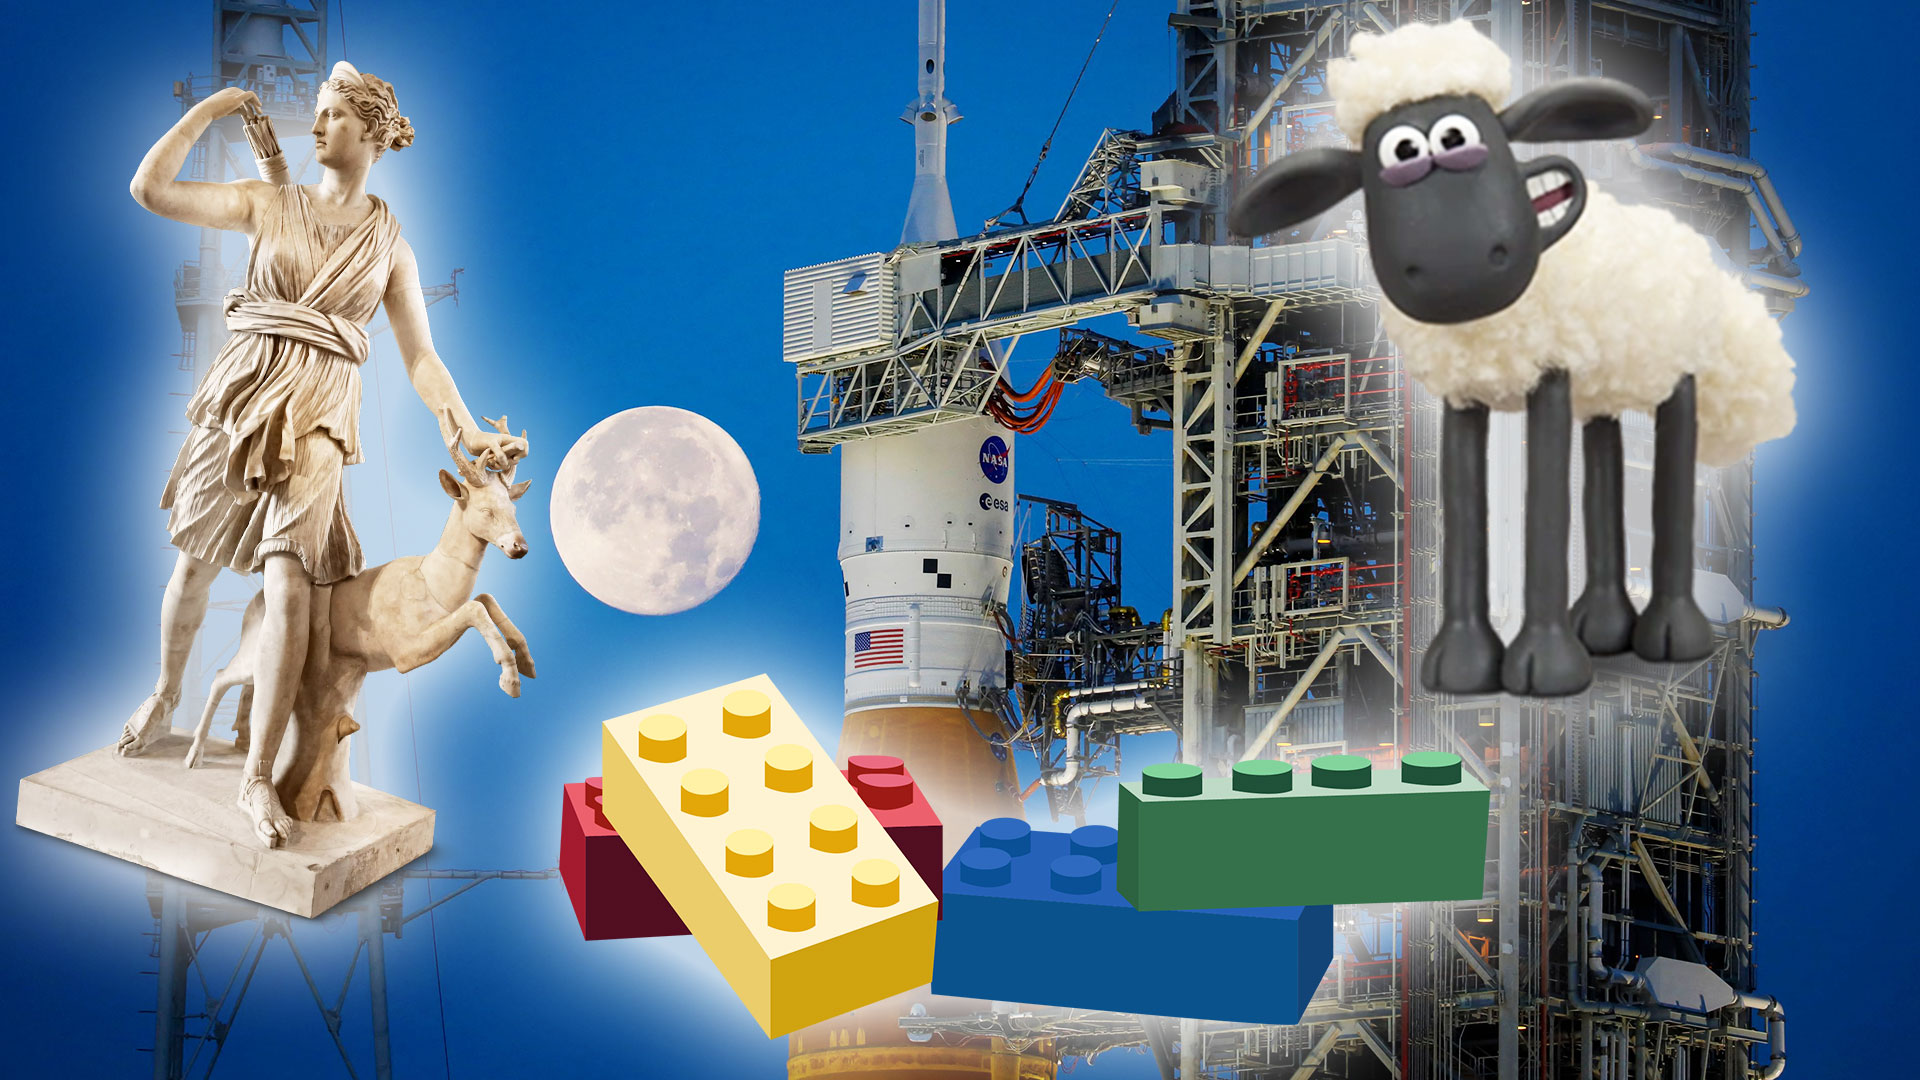 The bizarre items discovered aboard Nasa’s latest mission to Moon reveal everything, from Shaun the Sheep and Lego